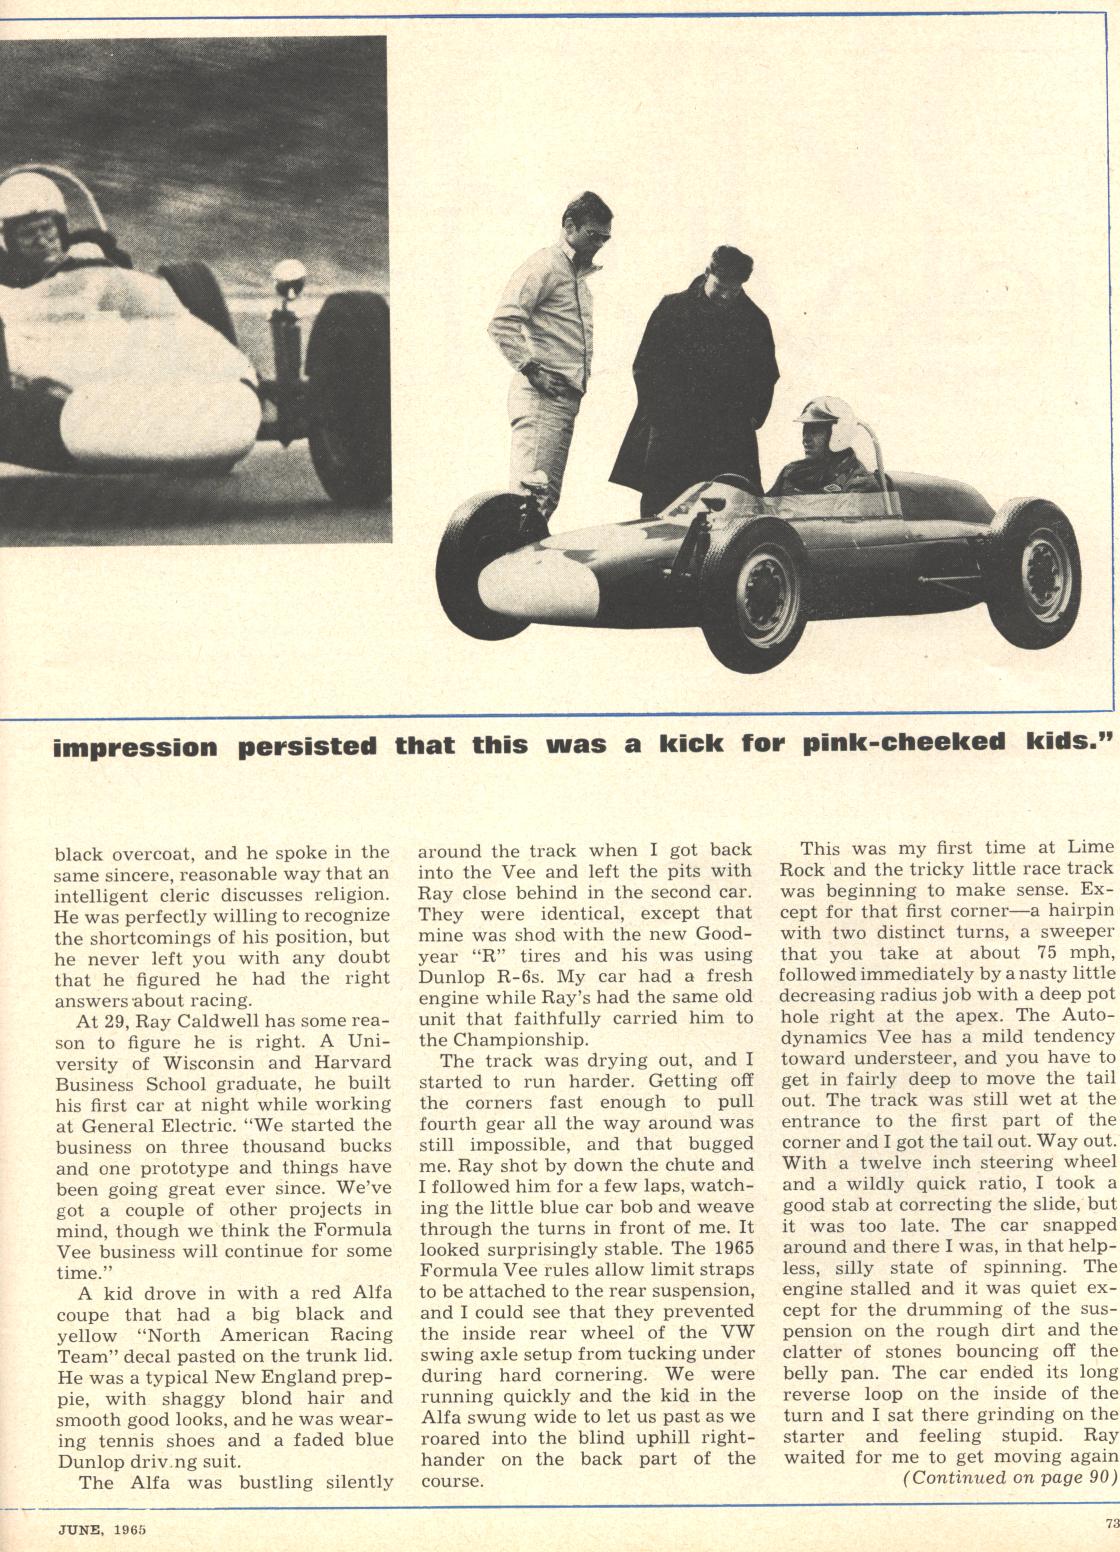 Car and driver Article page 3